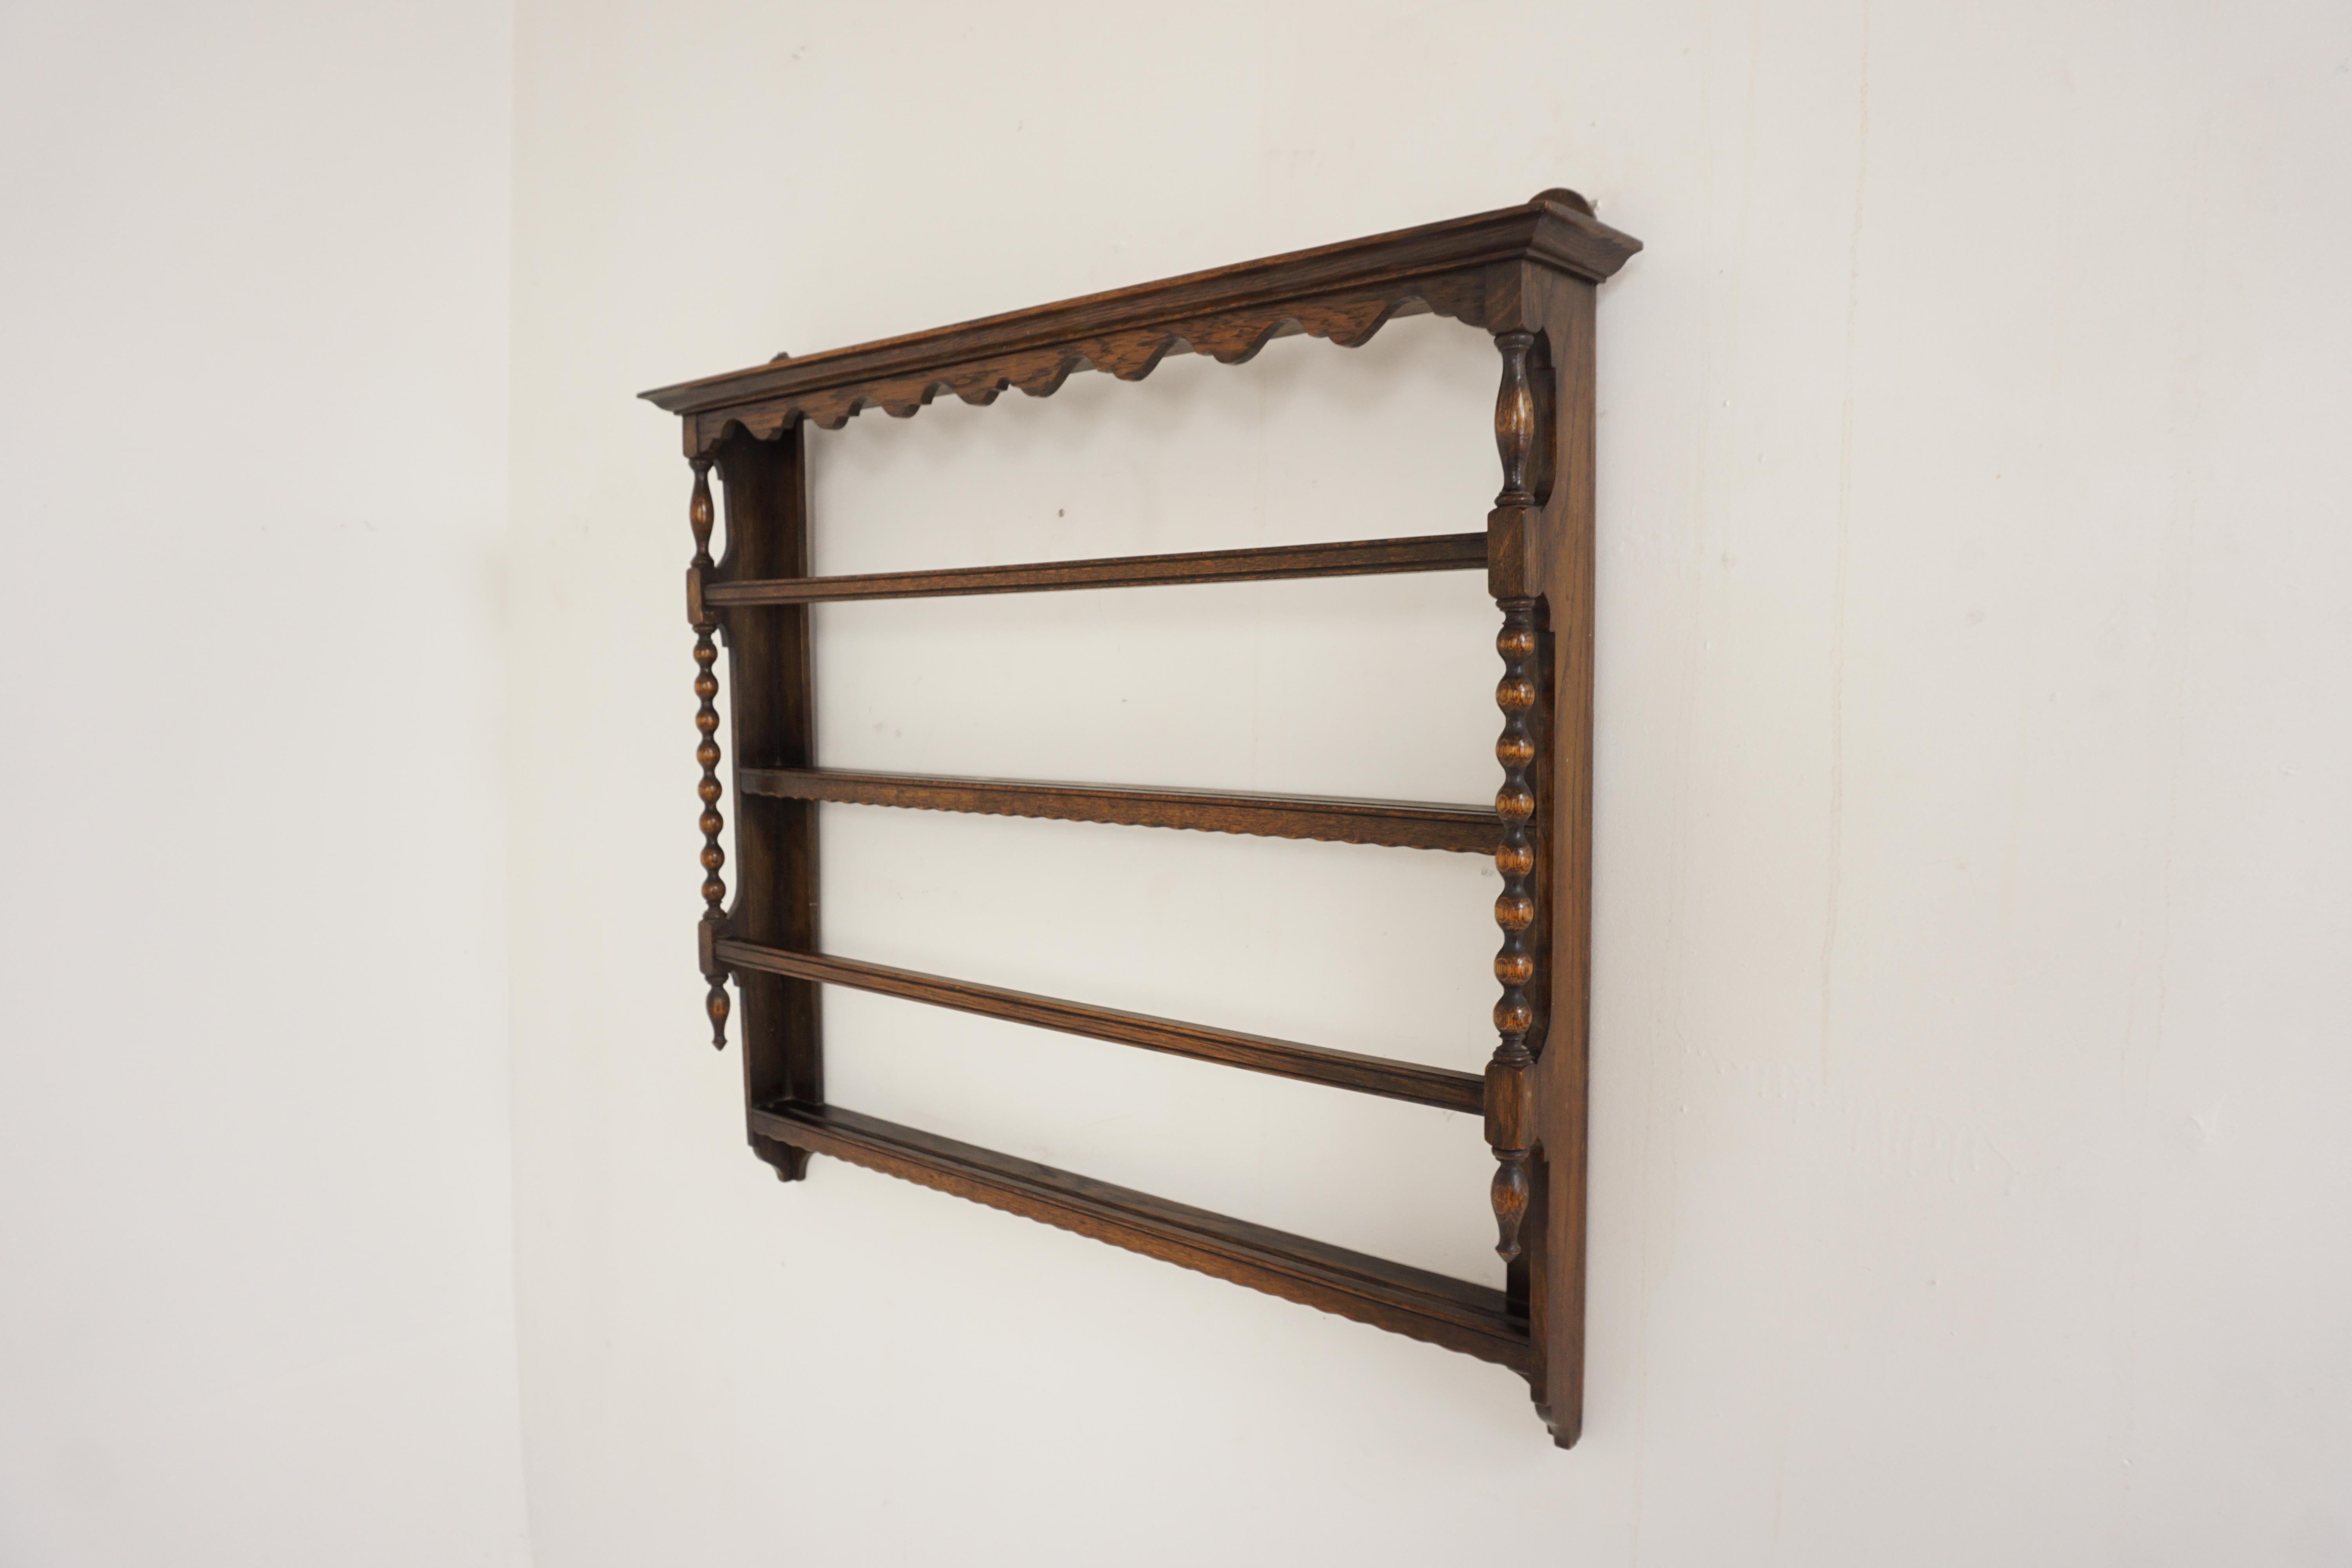 Antique oak wall hanging plate rack delft rack, Scotland 1910, B2649

Scotland 1910
Solid oak
Original finish 
Moulded cornice on top
Shaped valance underneath
Sturdy hangers to the back
Pleasing decorative bobbin uprights
Complete with 3